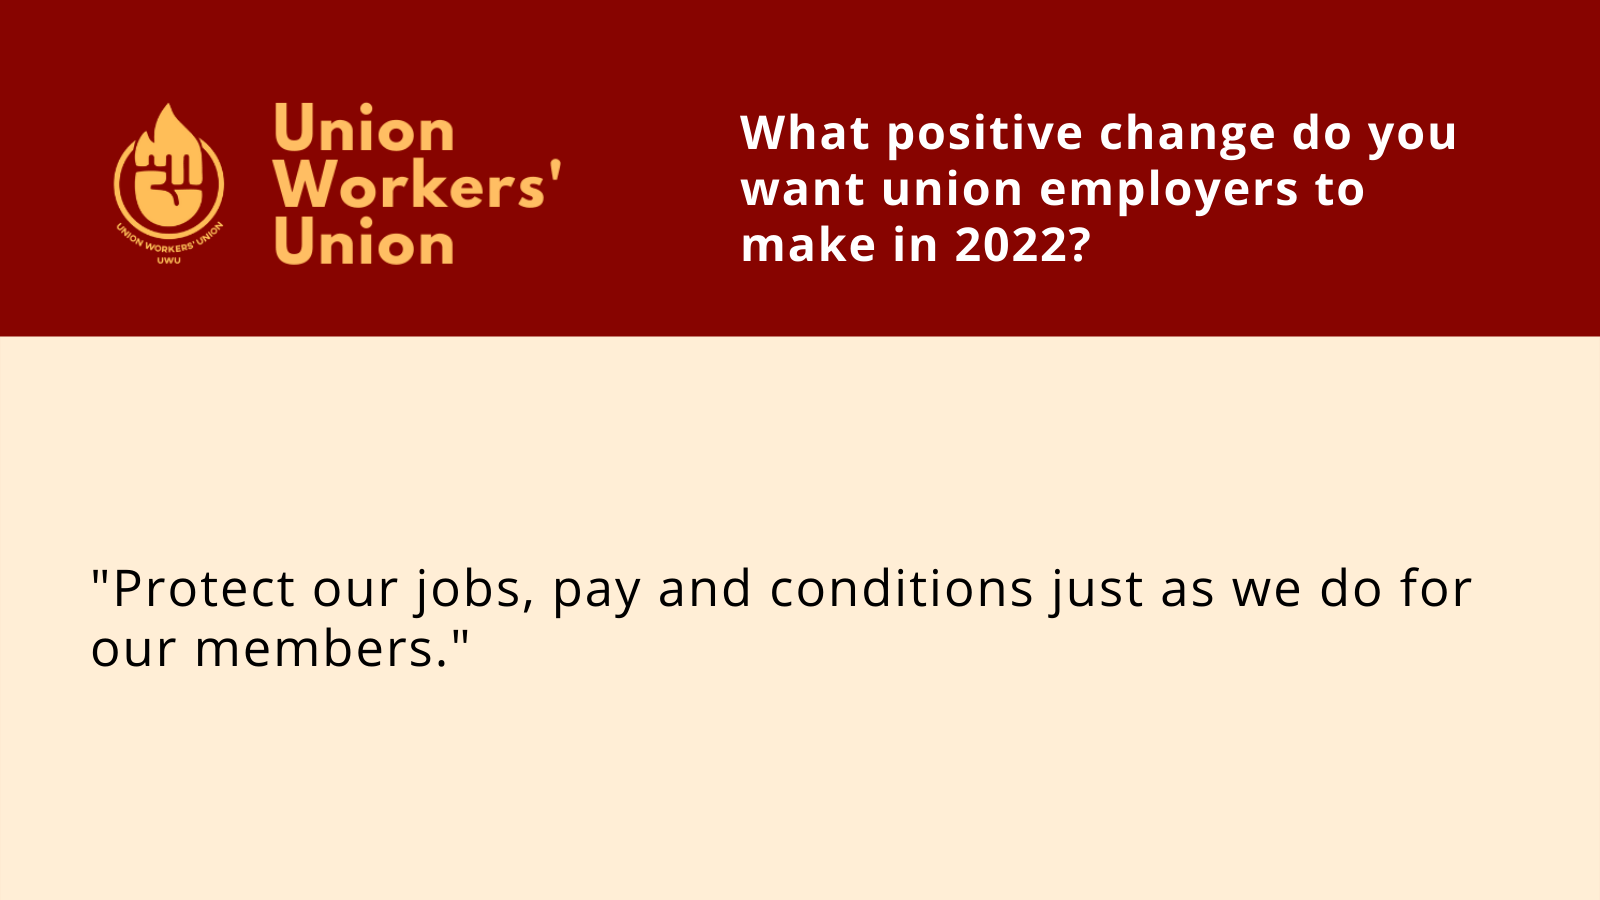 UWU logo next to question, what positive change do you want union employers to make in 2022?  Member response: Protect our jobs, pay and conditions just as we do for our members 